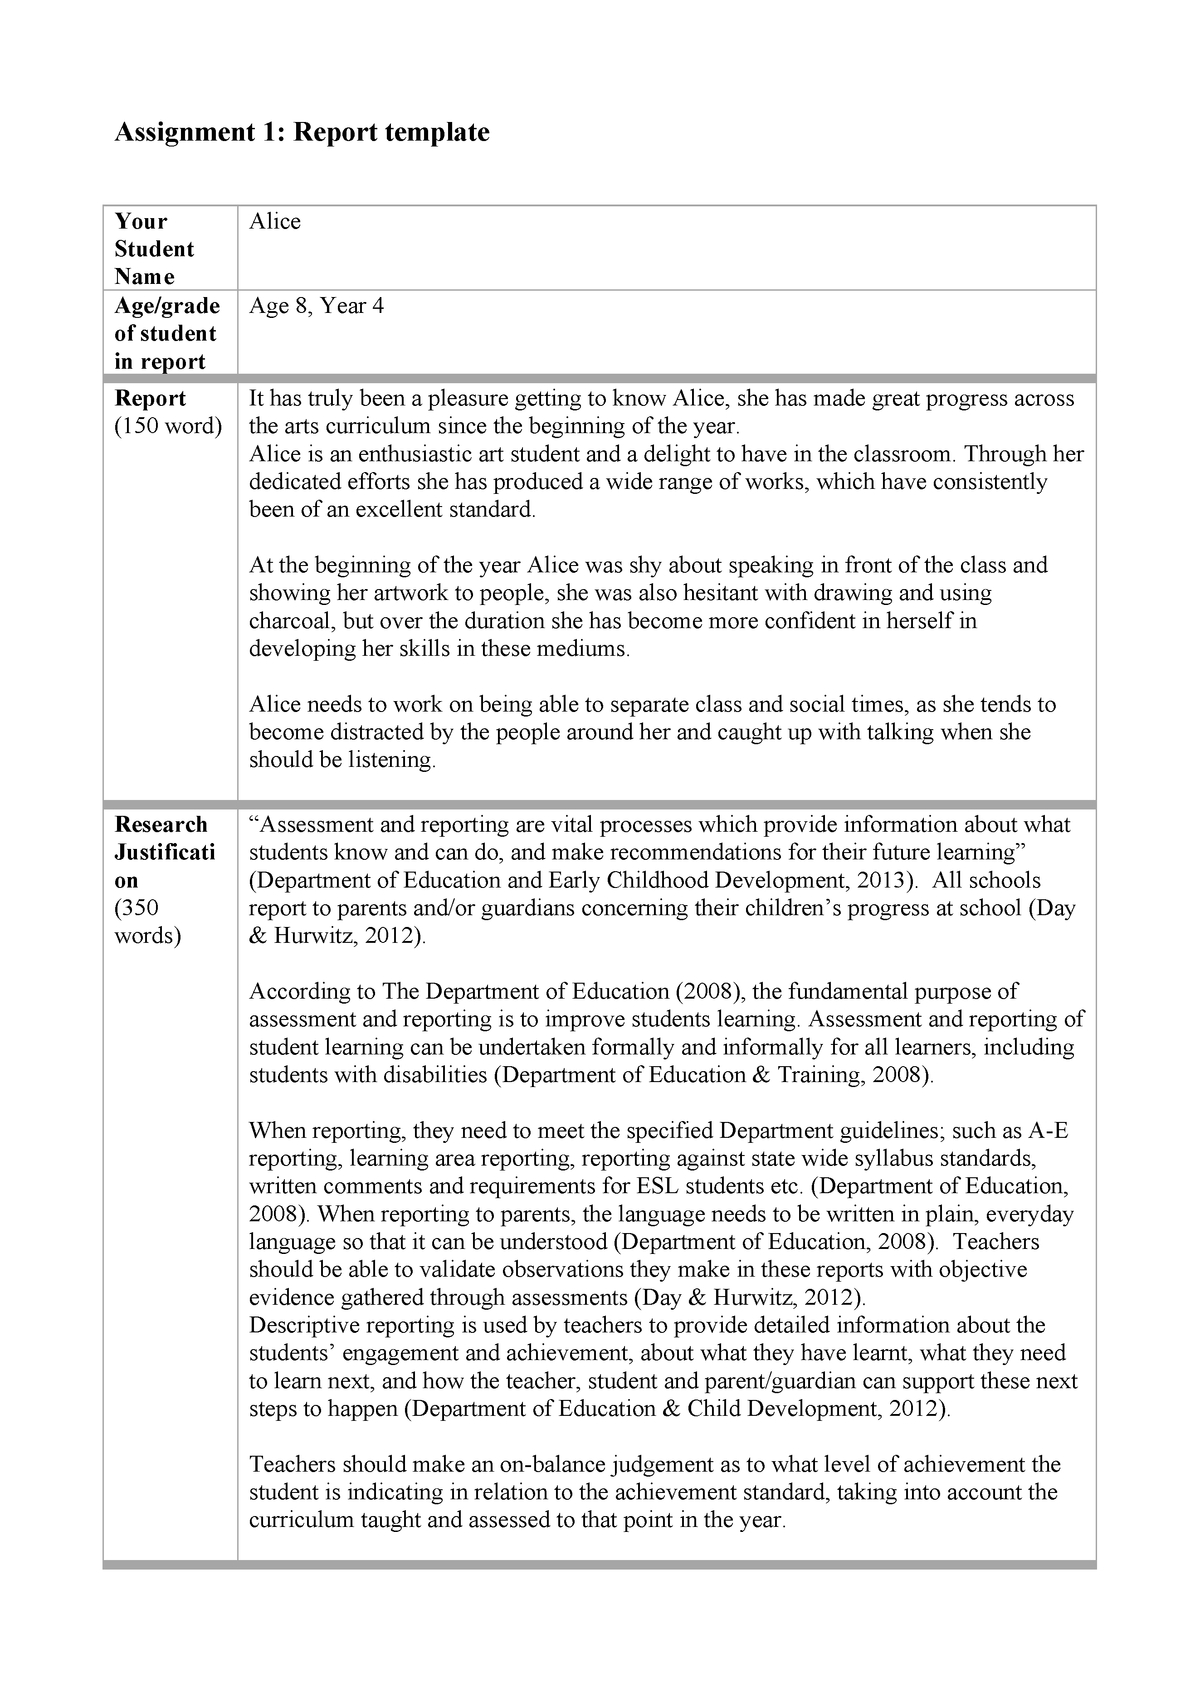 Report Template – Assignment – 6890 Arts Education 2 – Uc With Regard To Assignment Report Template